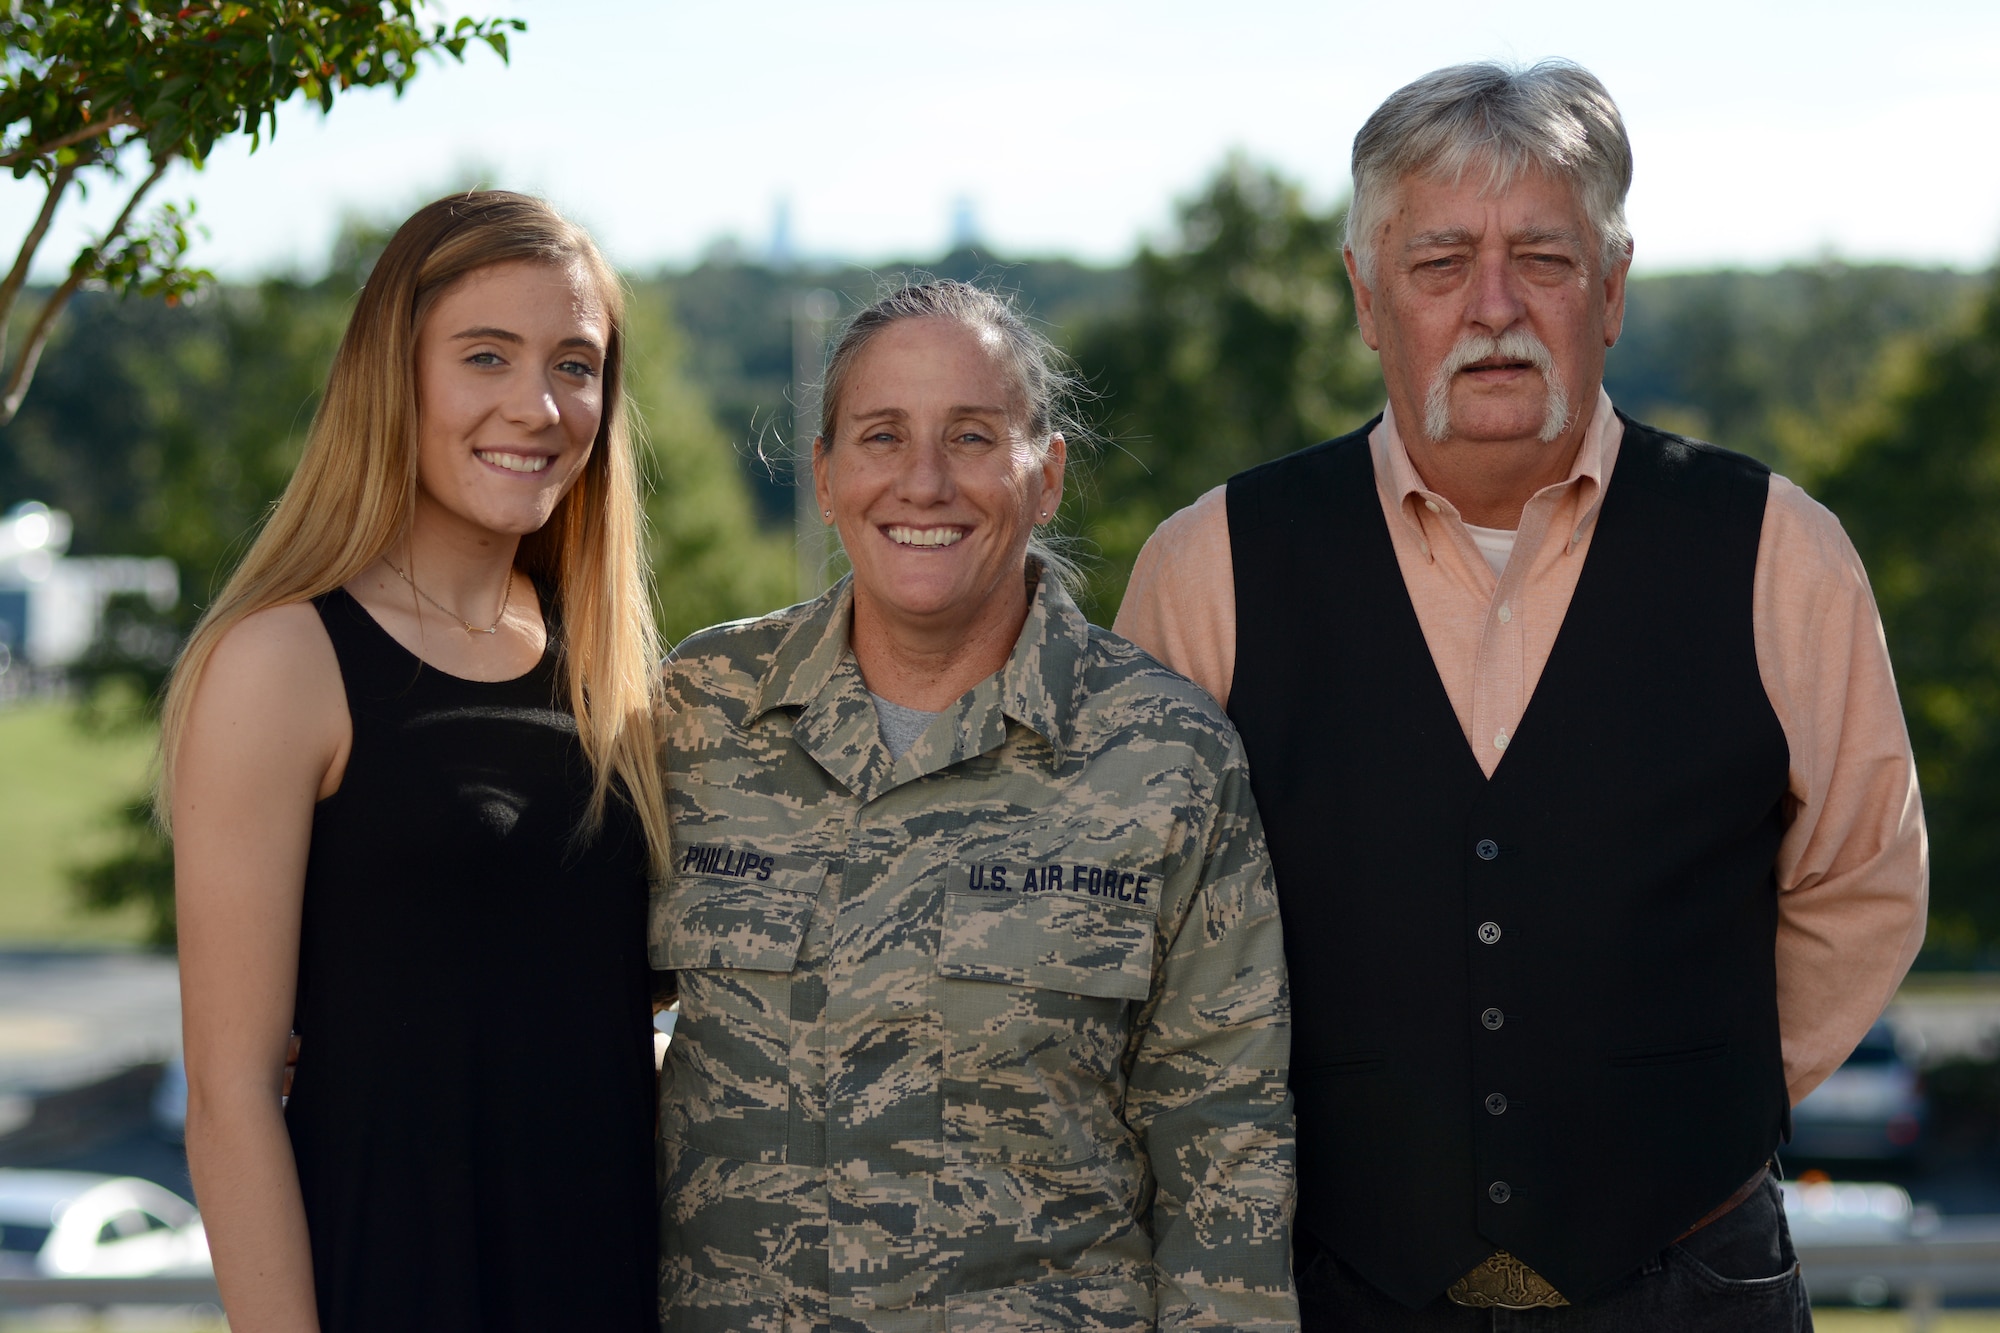 U.S. Air Force Chief Master Sgt. Lisa Phillips (center) poses for family pictures following her recent promotion at the North Carolina Air National Guard Base, Charlotte Douglas International Airport, Oct. 13, 2018. Phillips is the first female Chief Master Sgt. ever assigned to the 145th Maintenance Group.